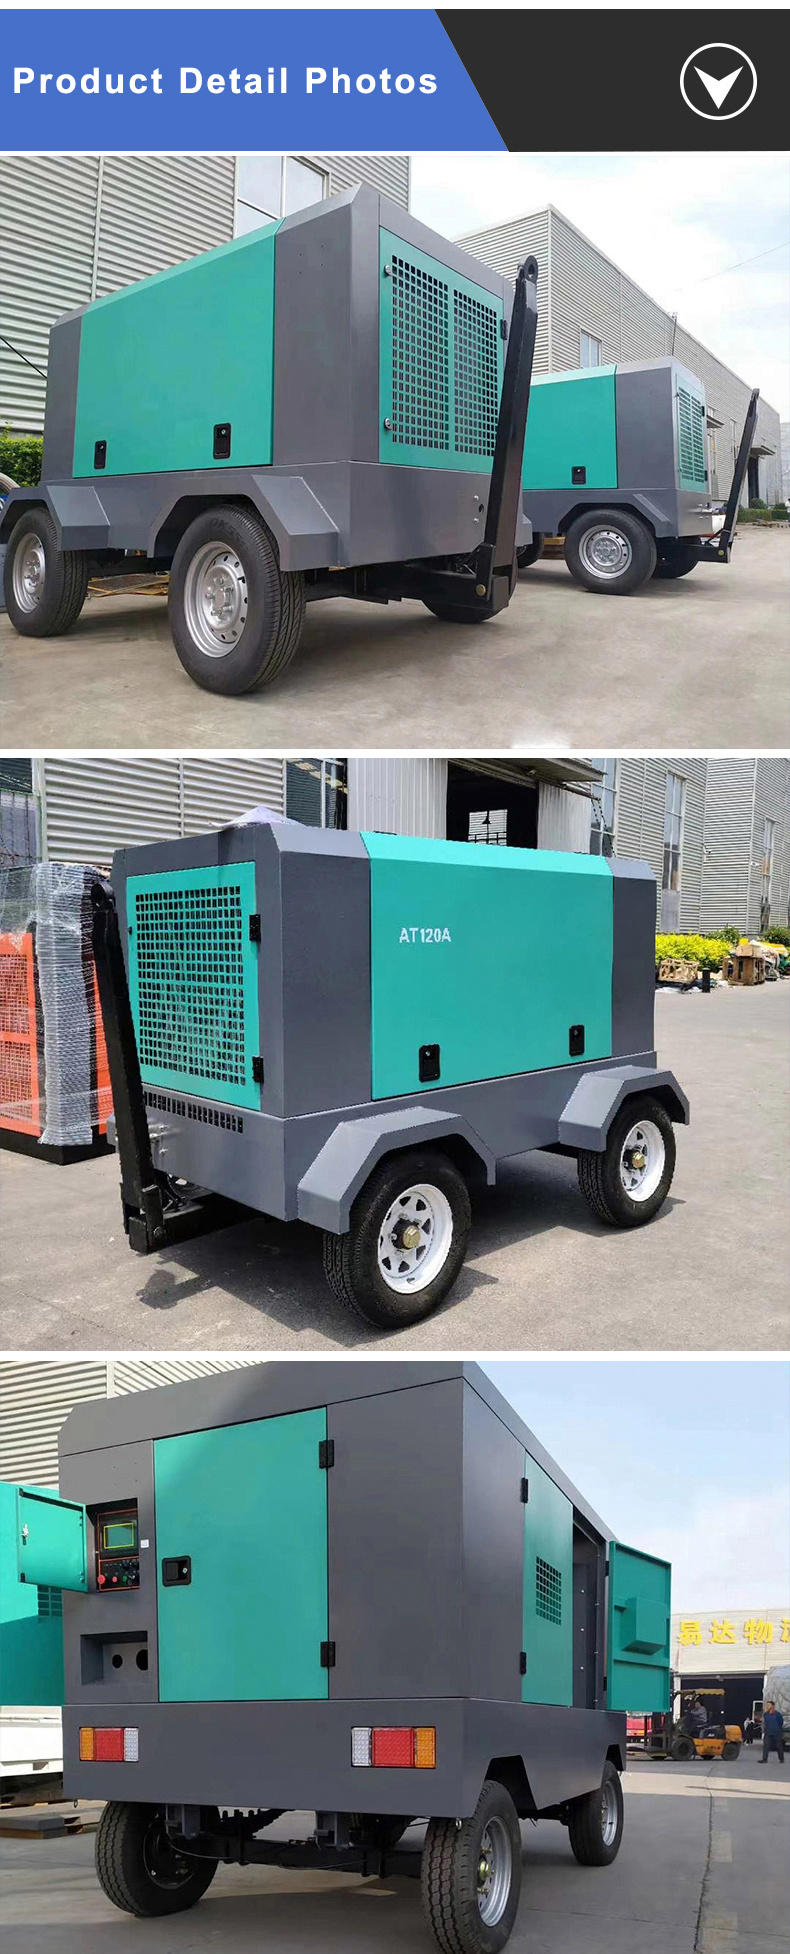 Oil Injected Direct Driven Portable Compressors Rotary Air Screw Compressors